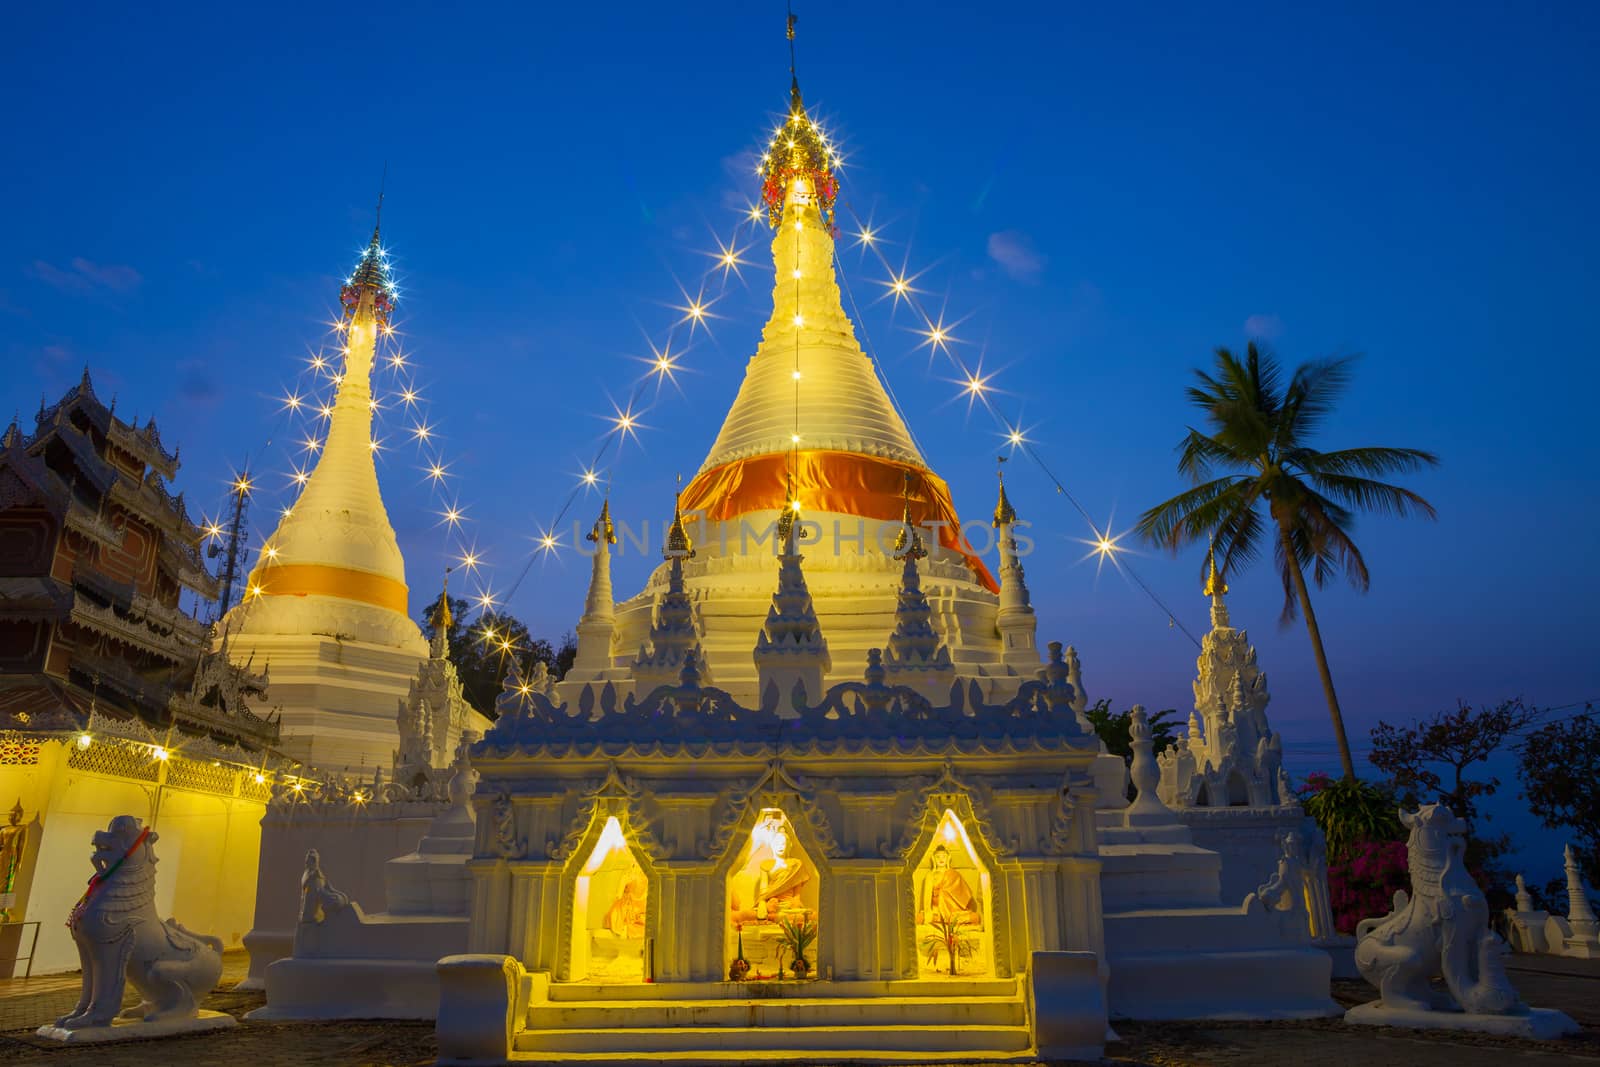 A white color of pagoda decorated by lighting at night time under clear sky located at north of Thailand